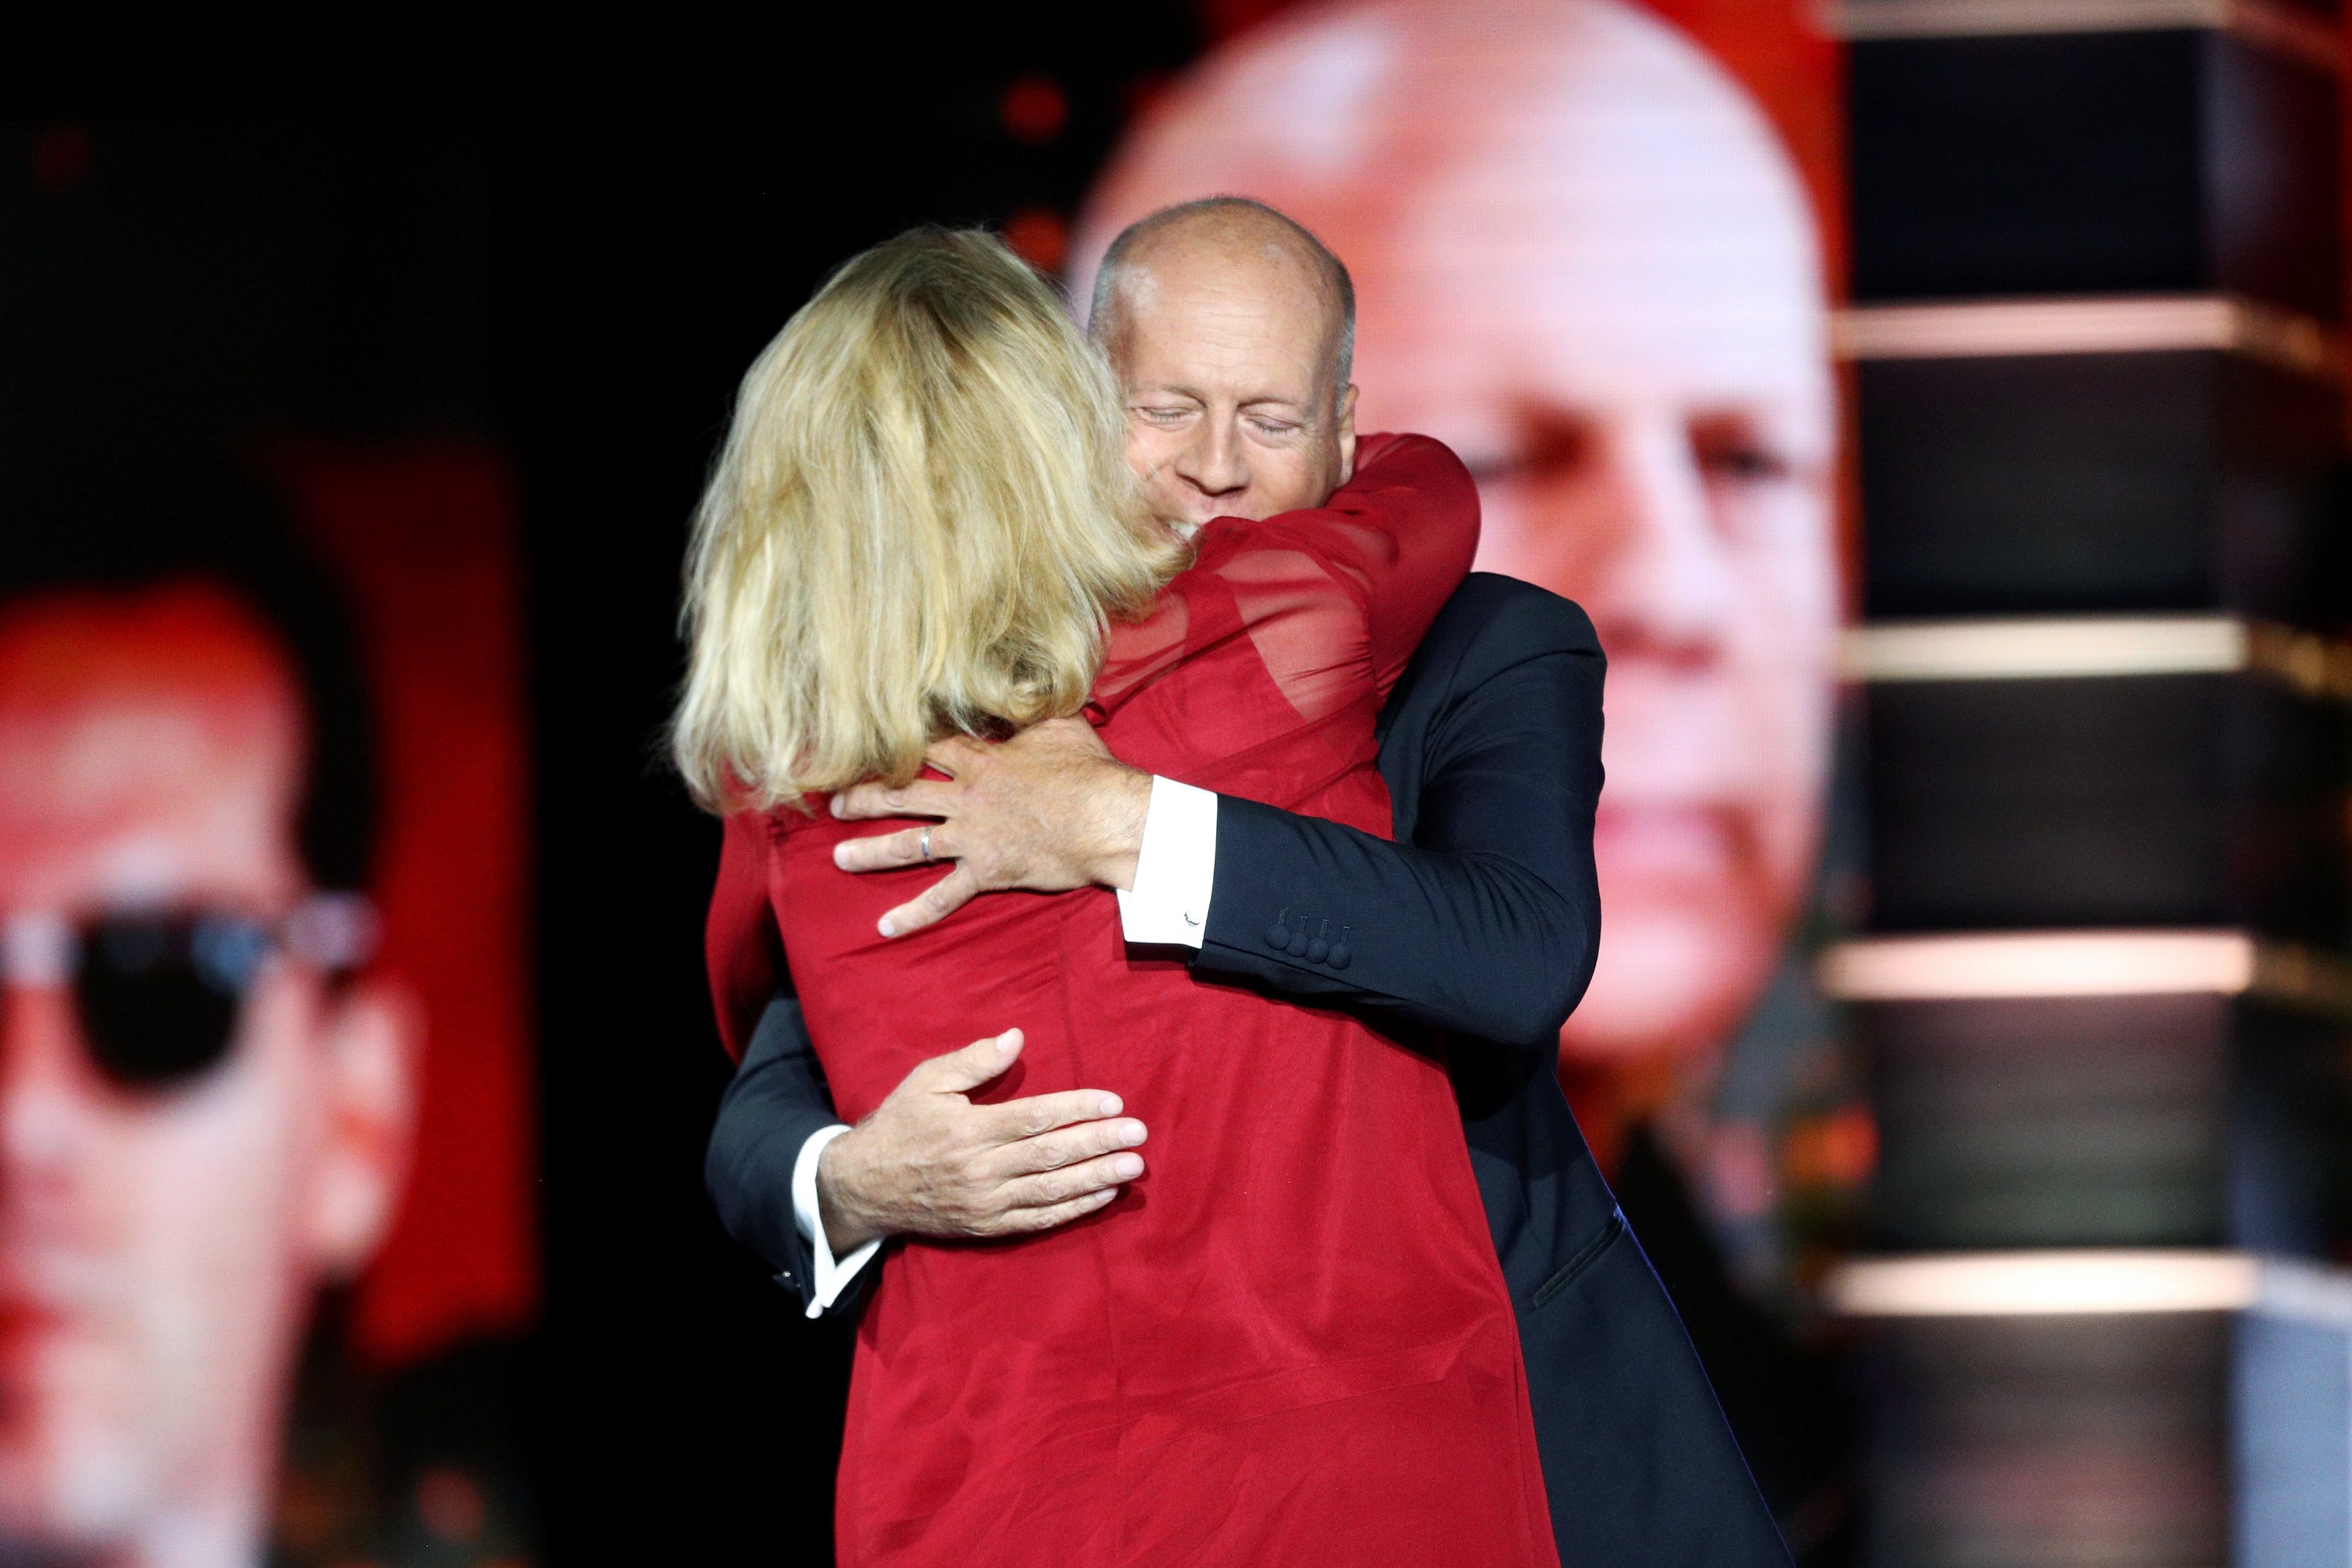 Cybill Shepherd and Bruce Willis during the Comedy Central Roast of Bruce Willis at Hollywood Palladium on July 14, 2018 | Photo: GettyImages